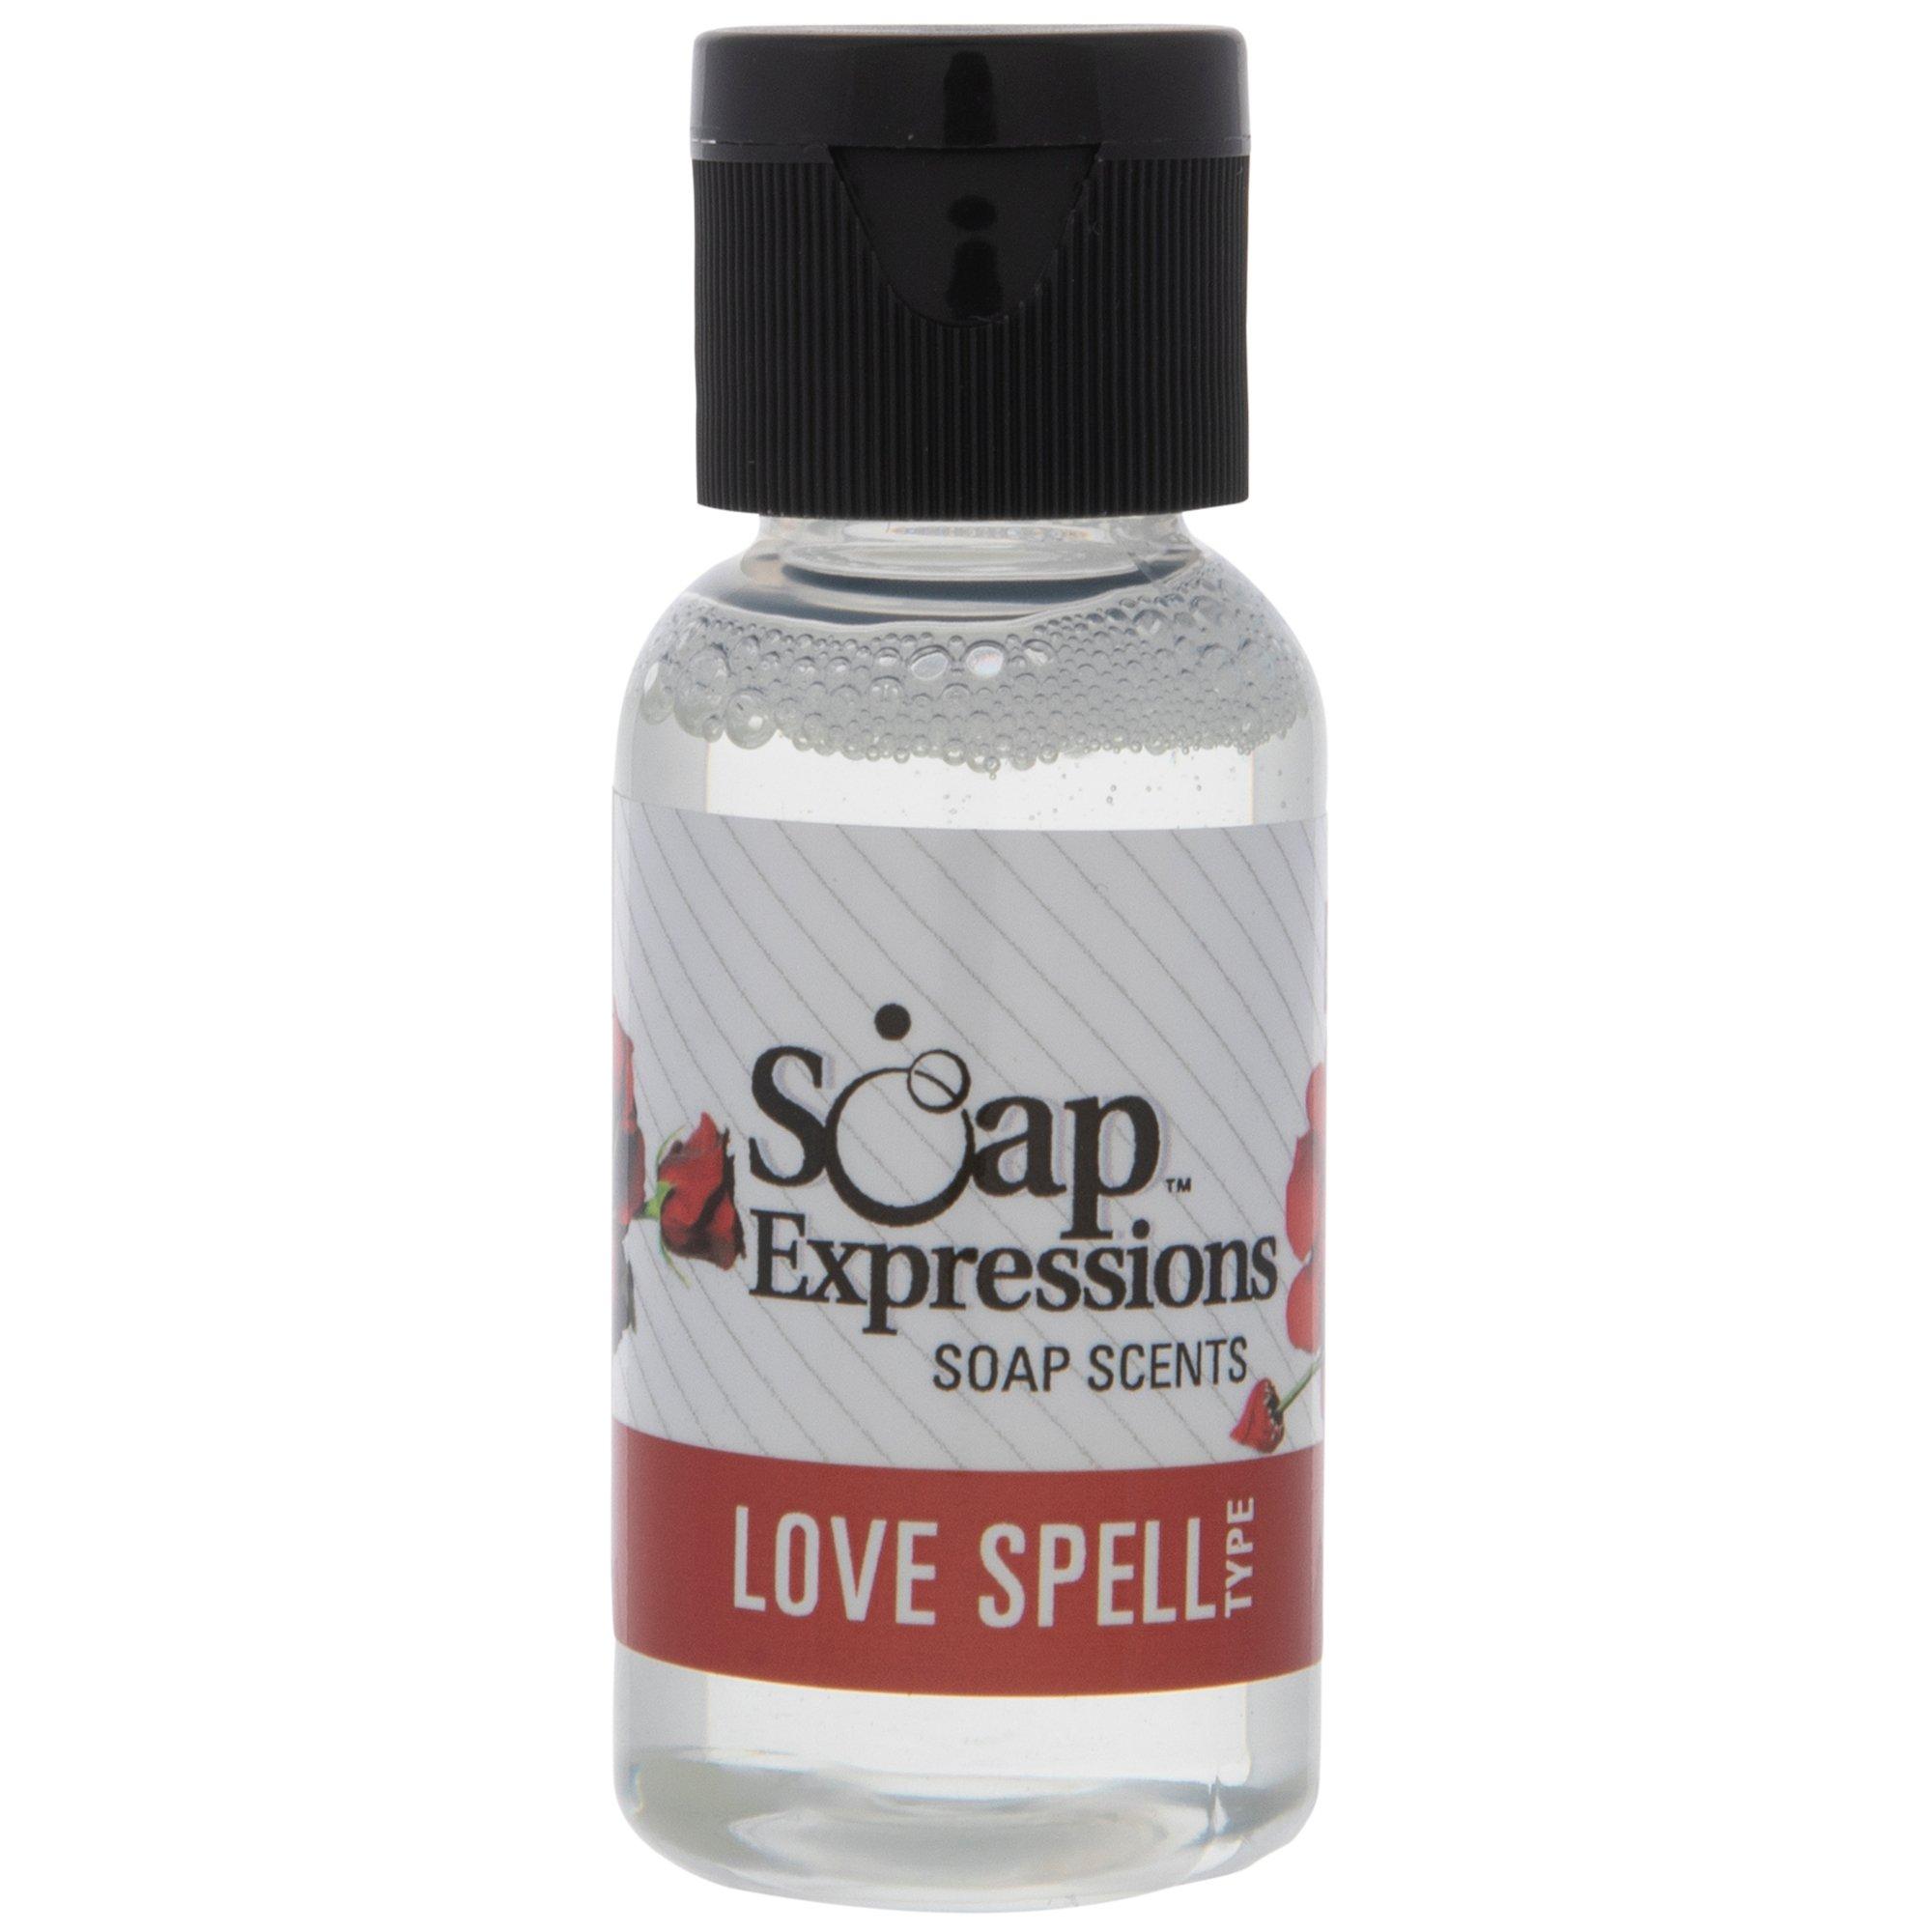 LOVE SPELL FRAGRANCE OIL - 4 OZ - FOR CANDLE & SOAP MAKING BY VIRGINIA  CANDLE SUPPLY - FREE S&H IN USA